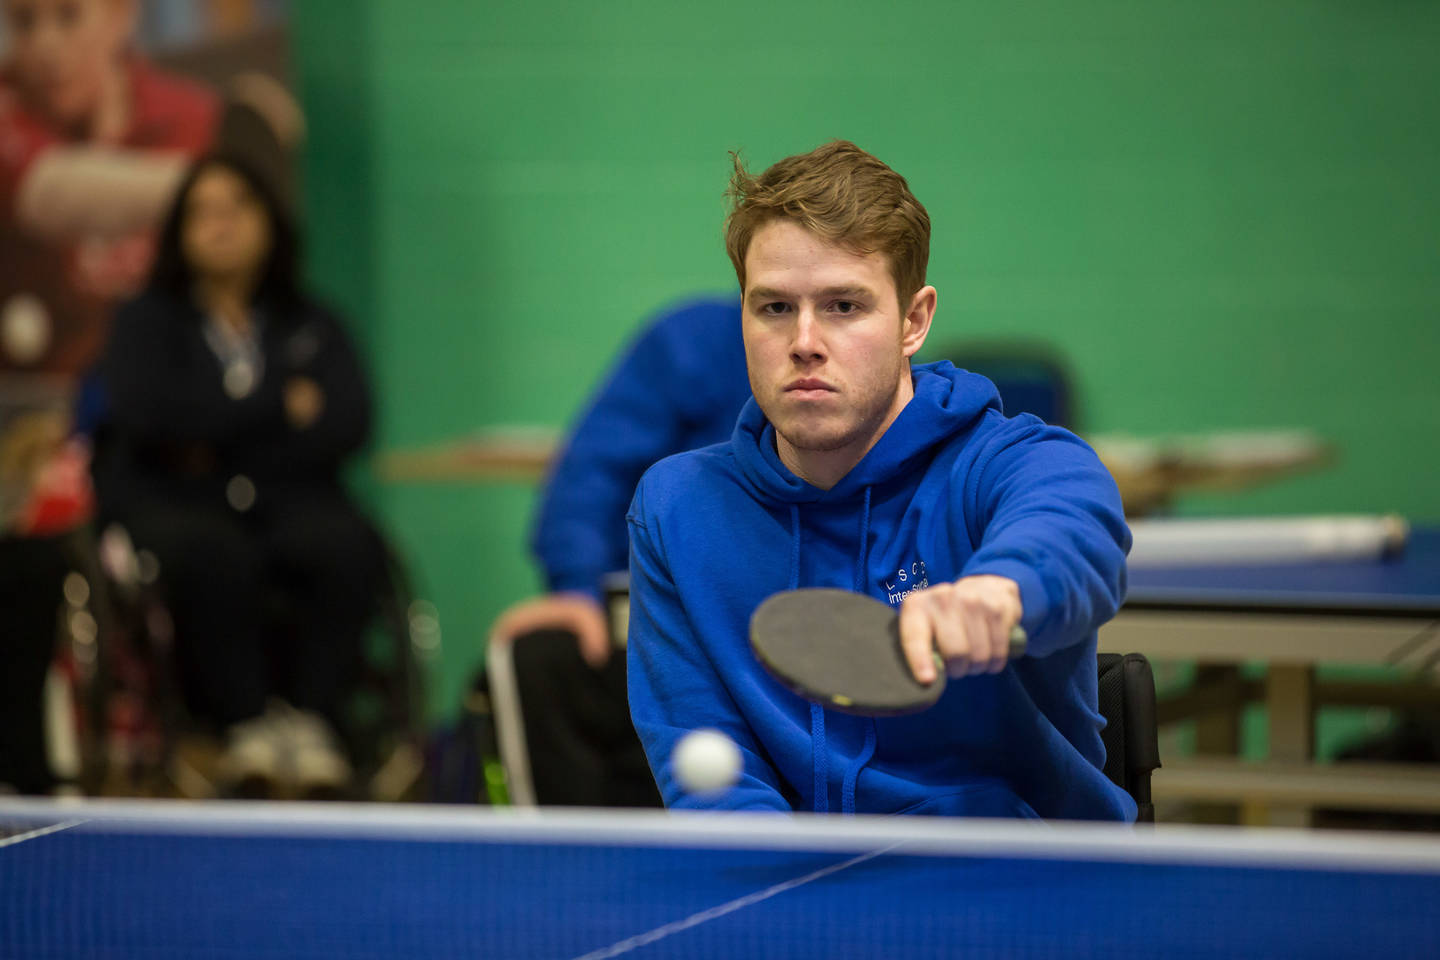 Male wheelchair user playing table tennis